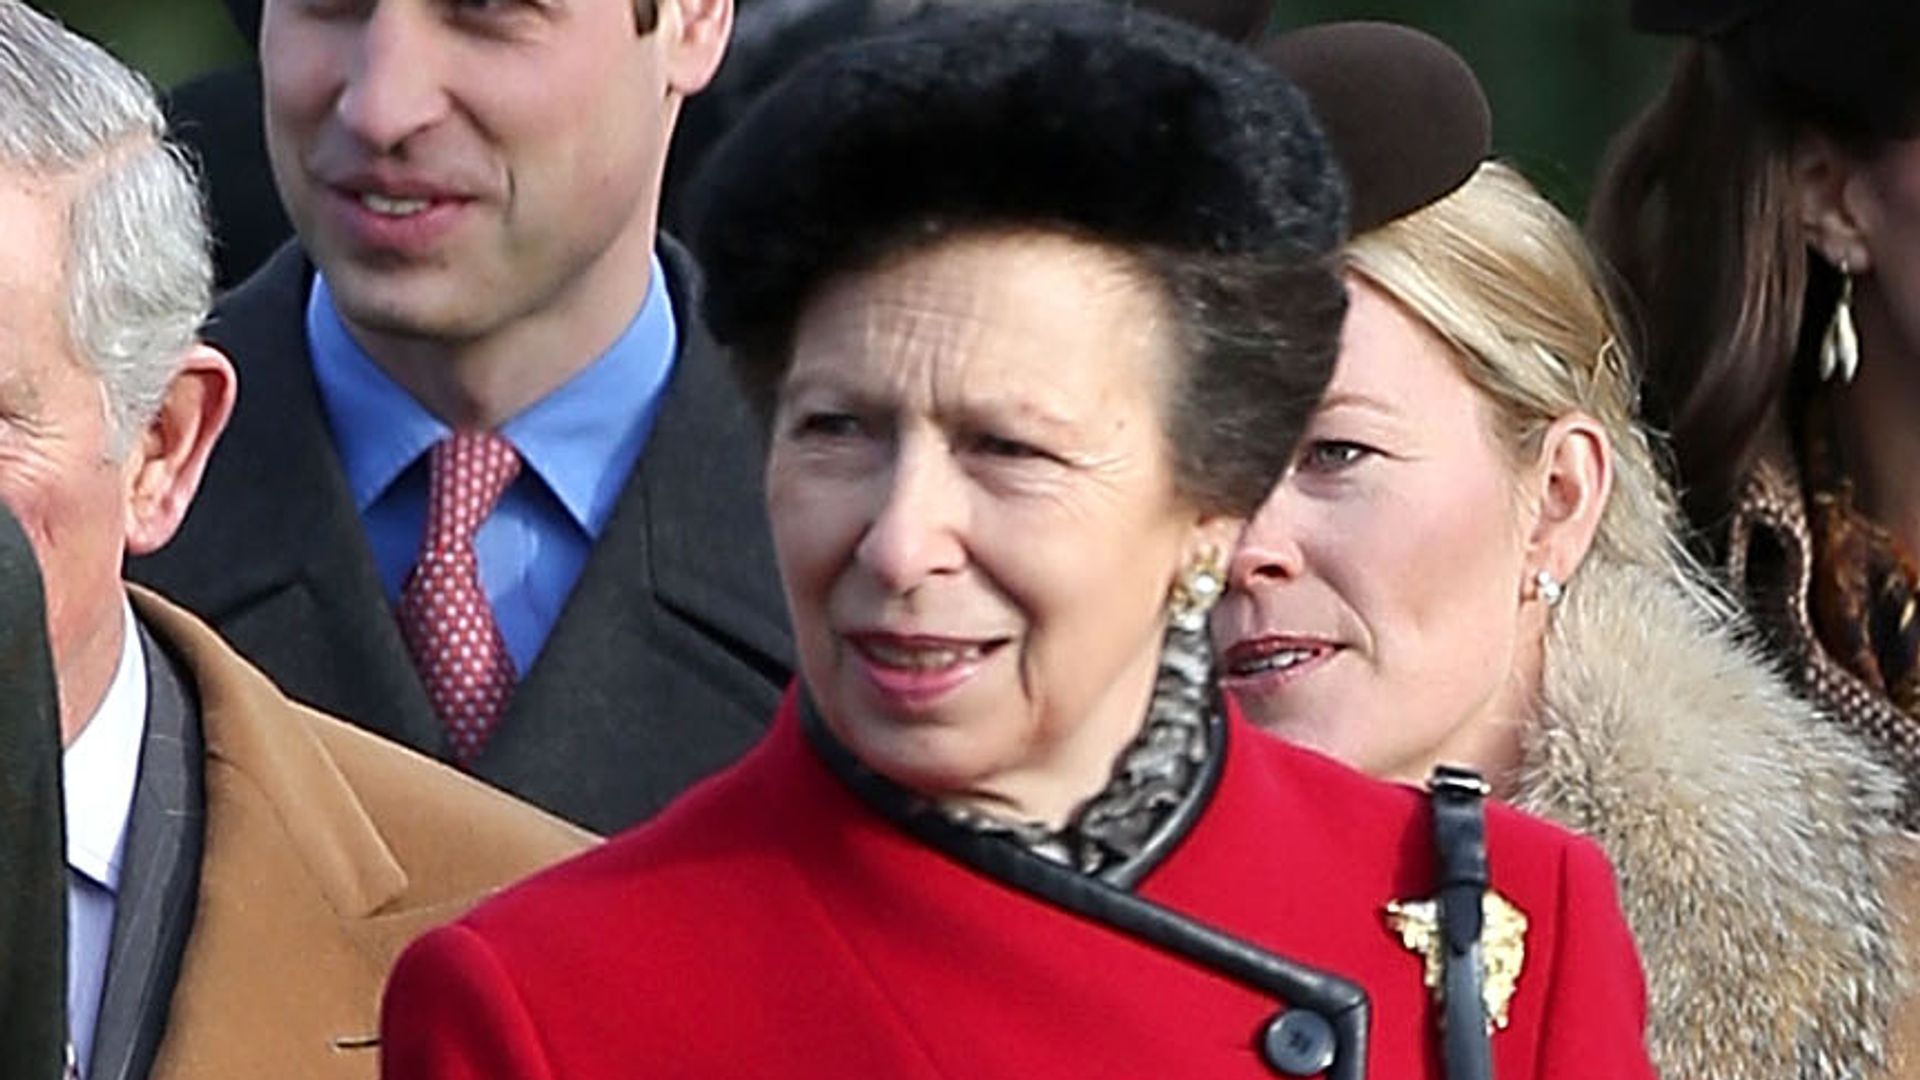 Princess Anne in a red coat outside with the royal family